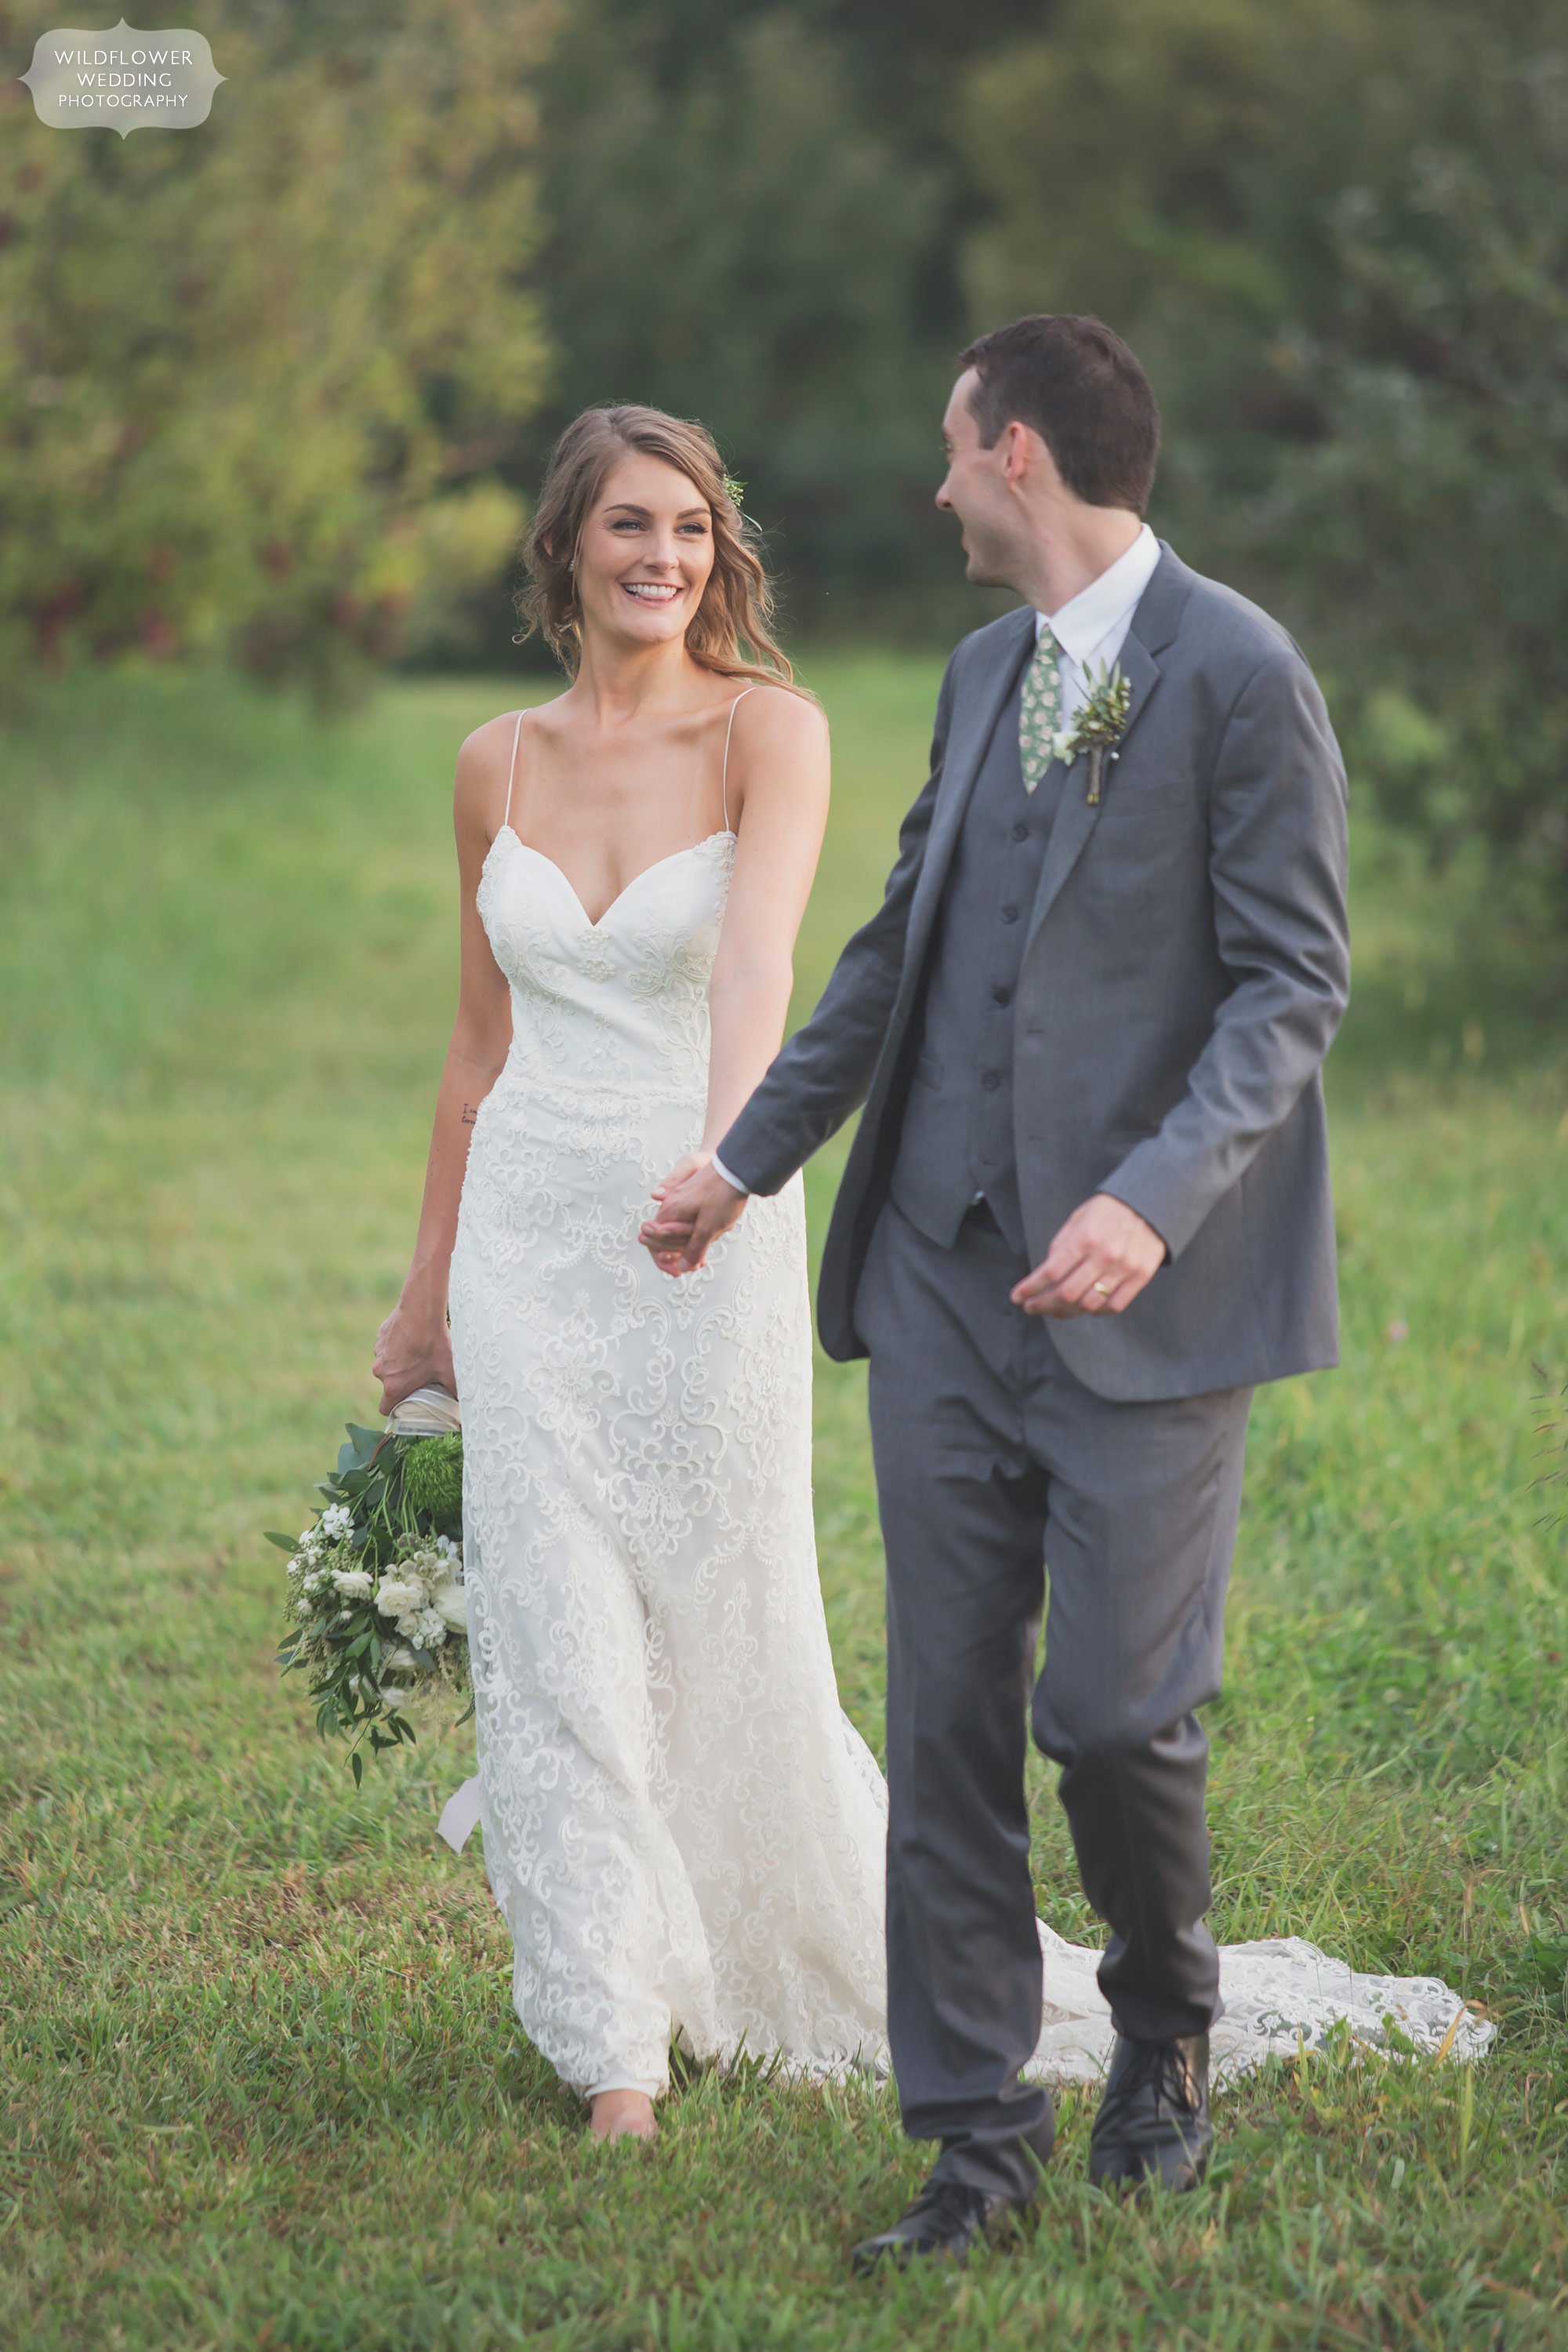 The groom leading the bride through a tall grass field at this barn wedding in Weston.